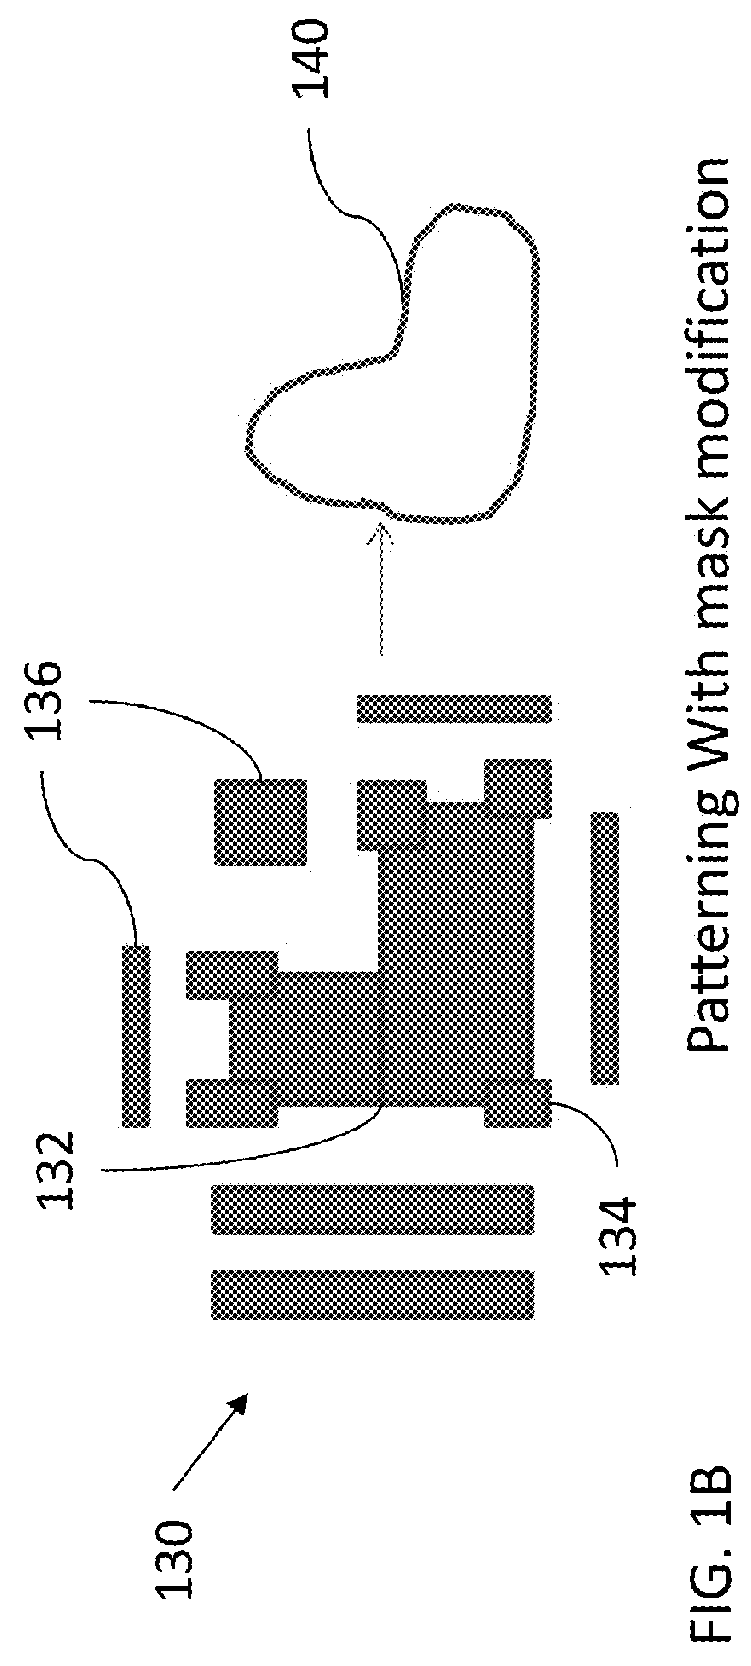 Efficient way to creating process window enhanced photomask layout